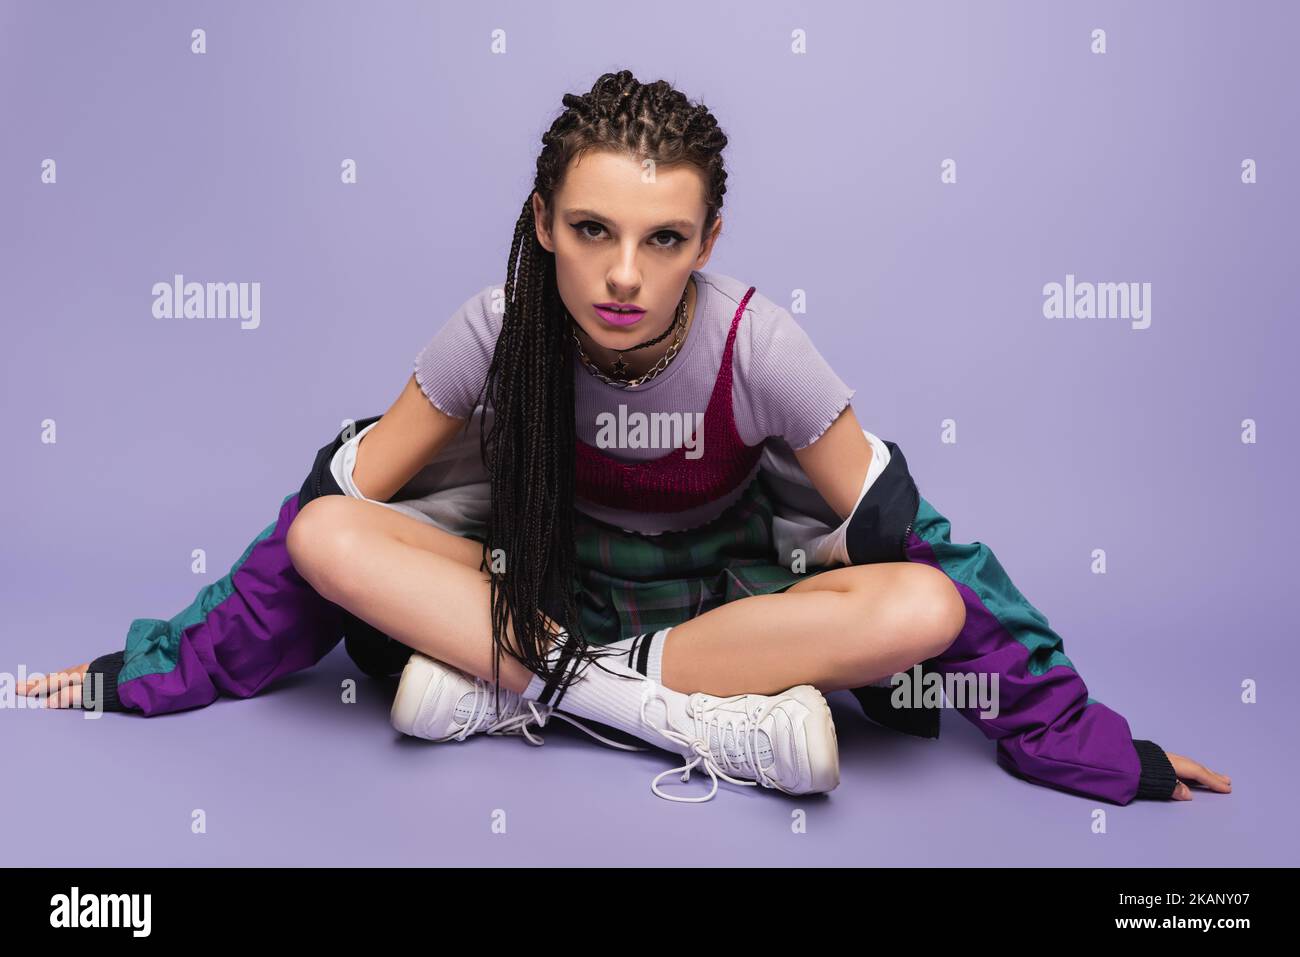 woman with braids sitting in casual nineties attire with crossed legs and looking at camera on purple background,stock image Stock Photo